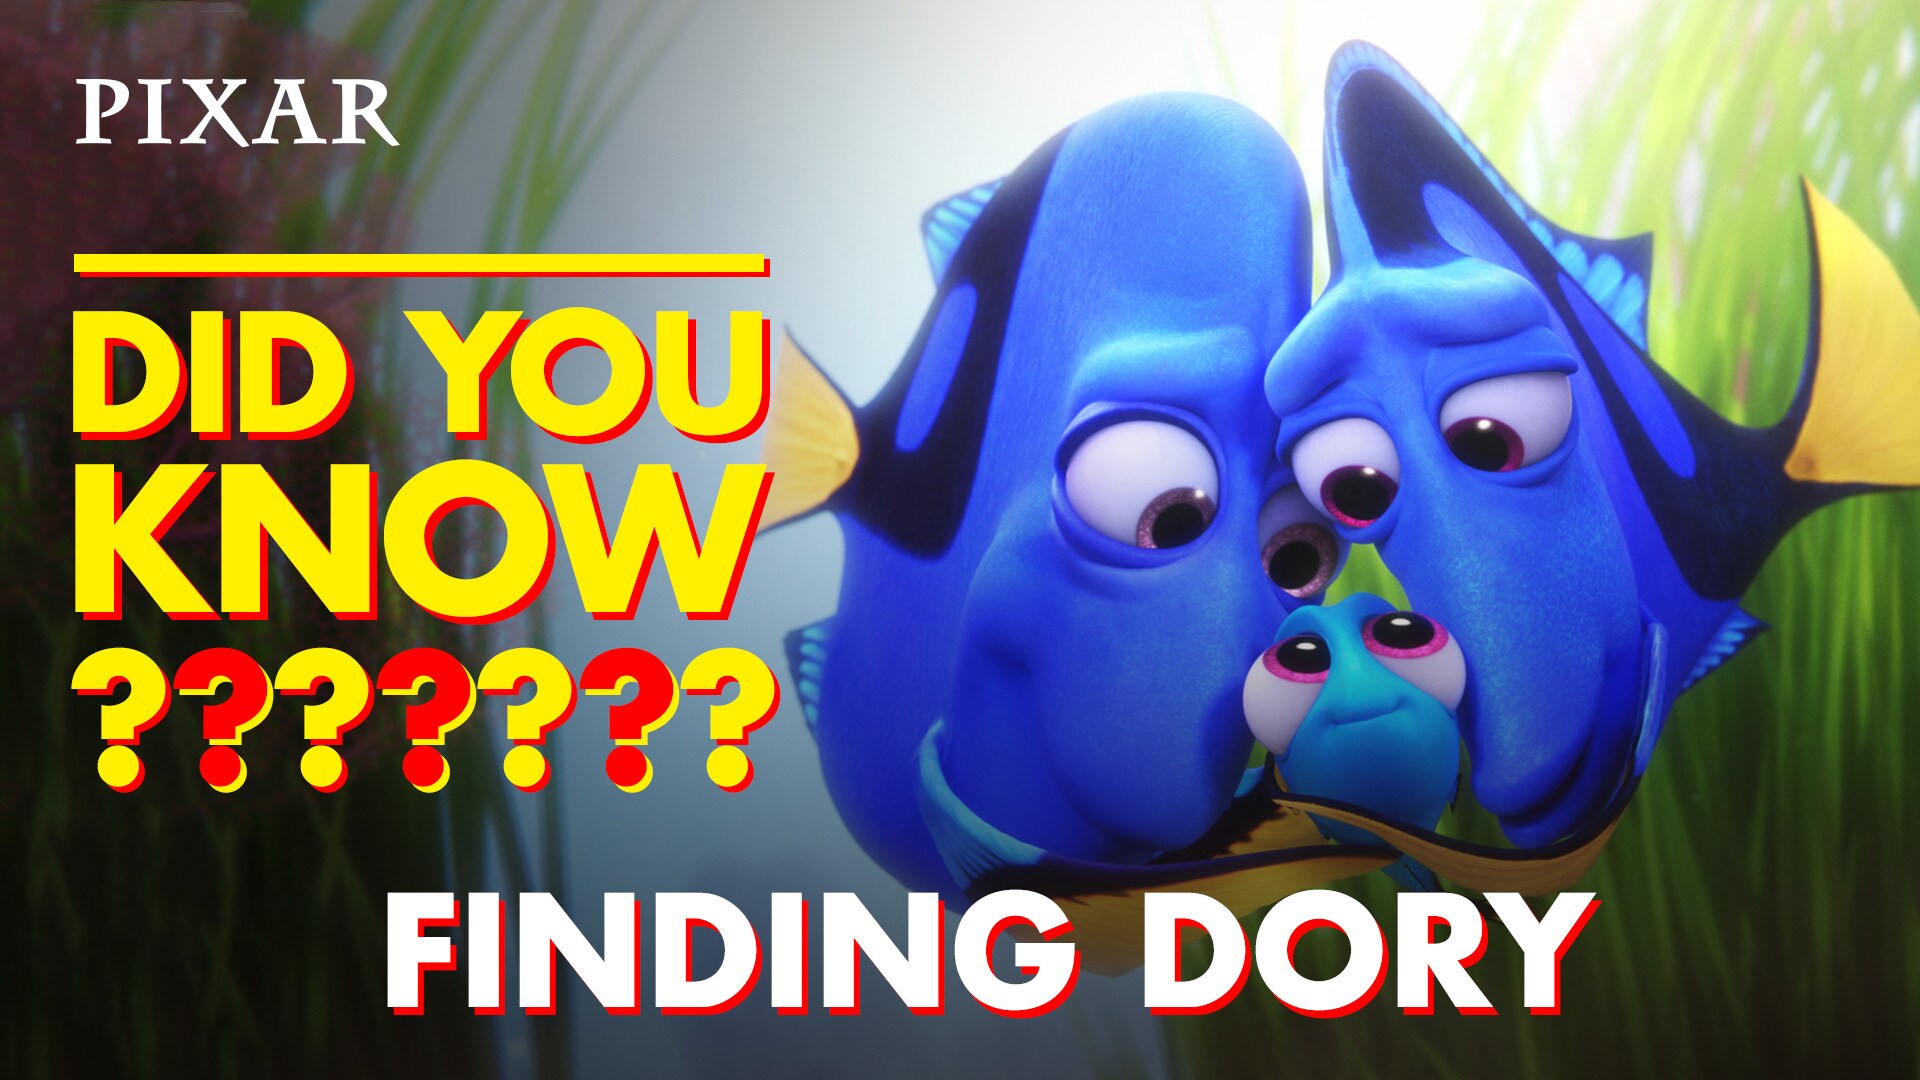 Finding Dory Fun Facts | Pixar Did You Know?